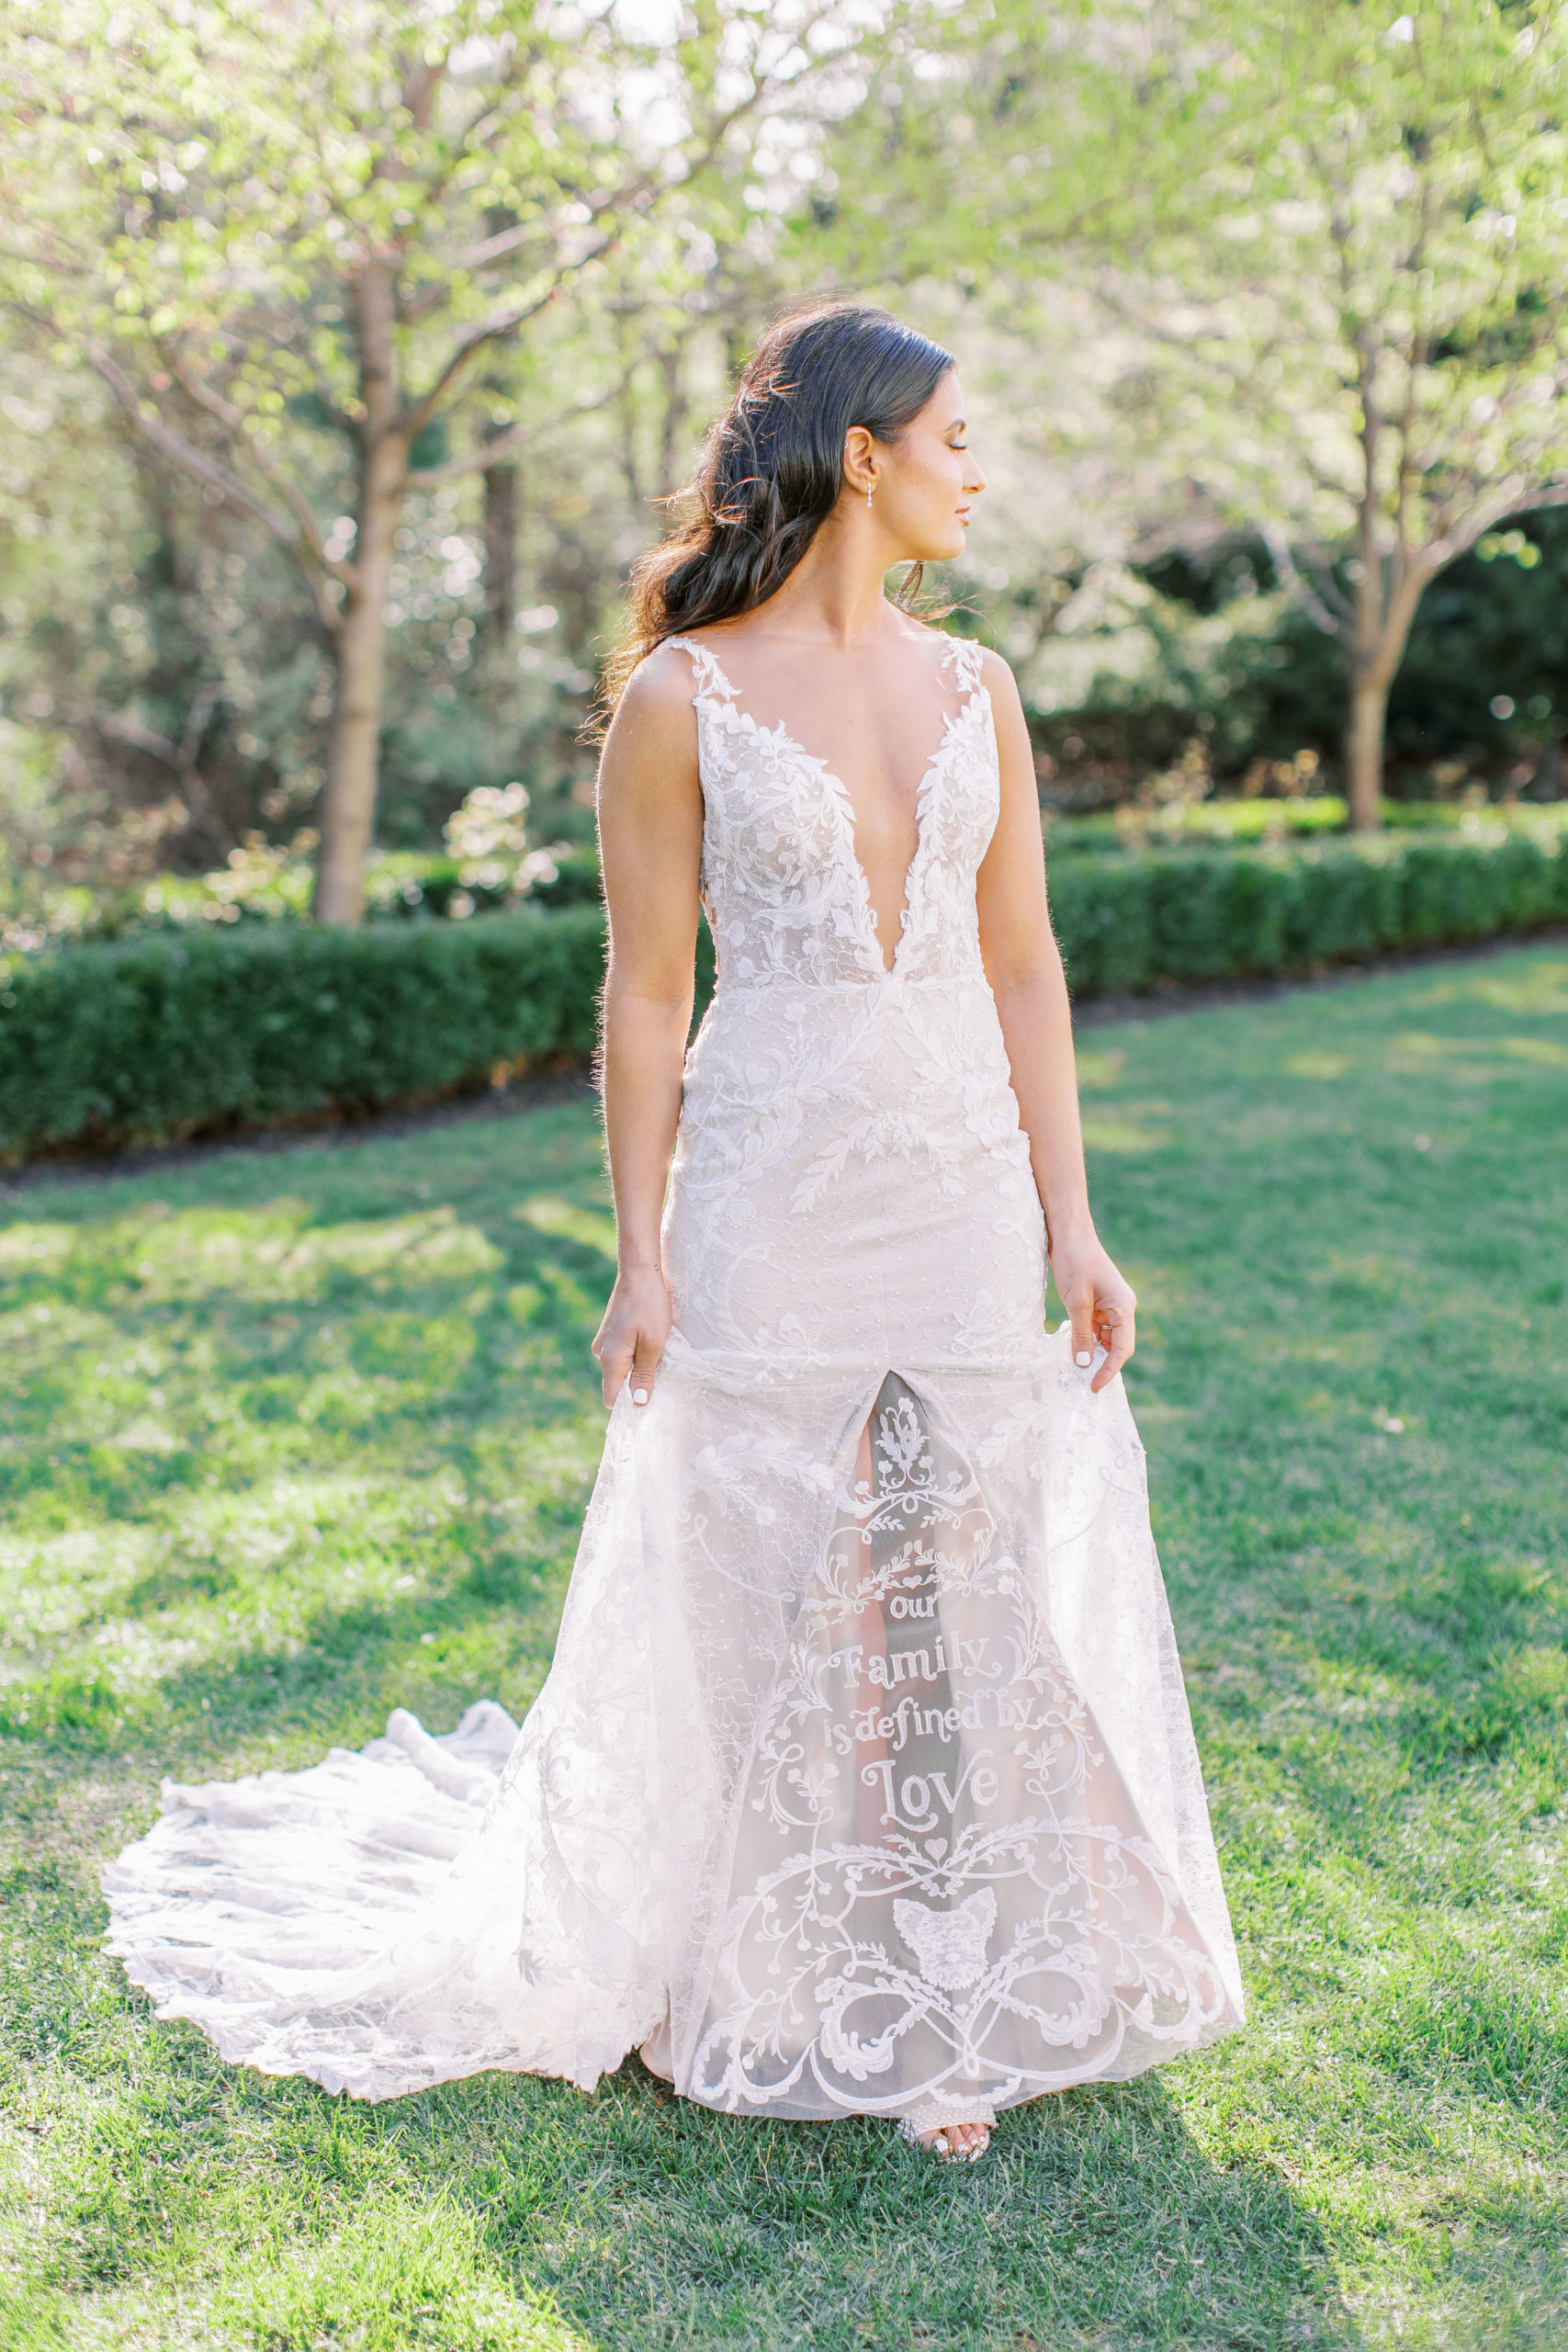 Bride holds out dress that says "Our Family is defined by Love" in garden for a Romantic Park Chateau Wedding Photography